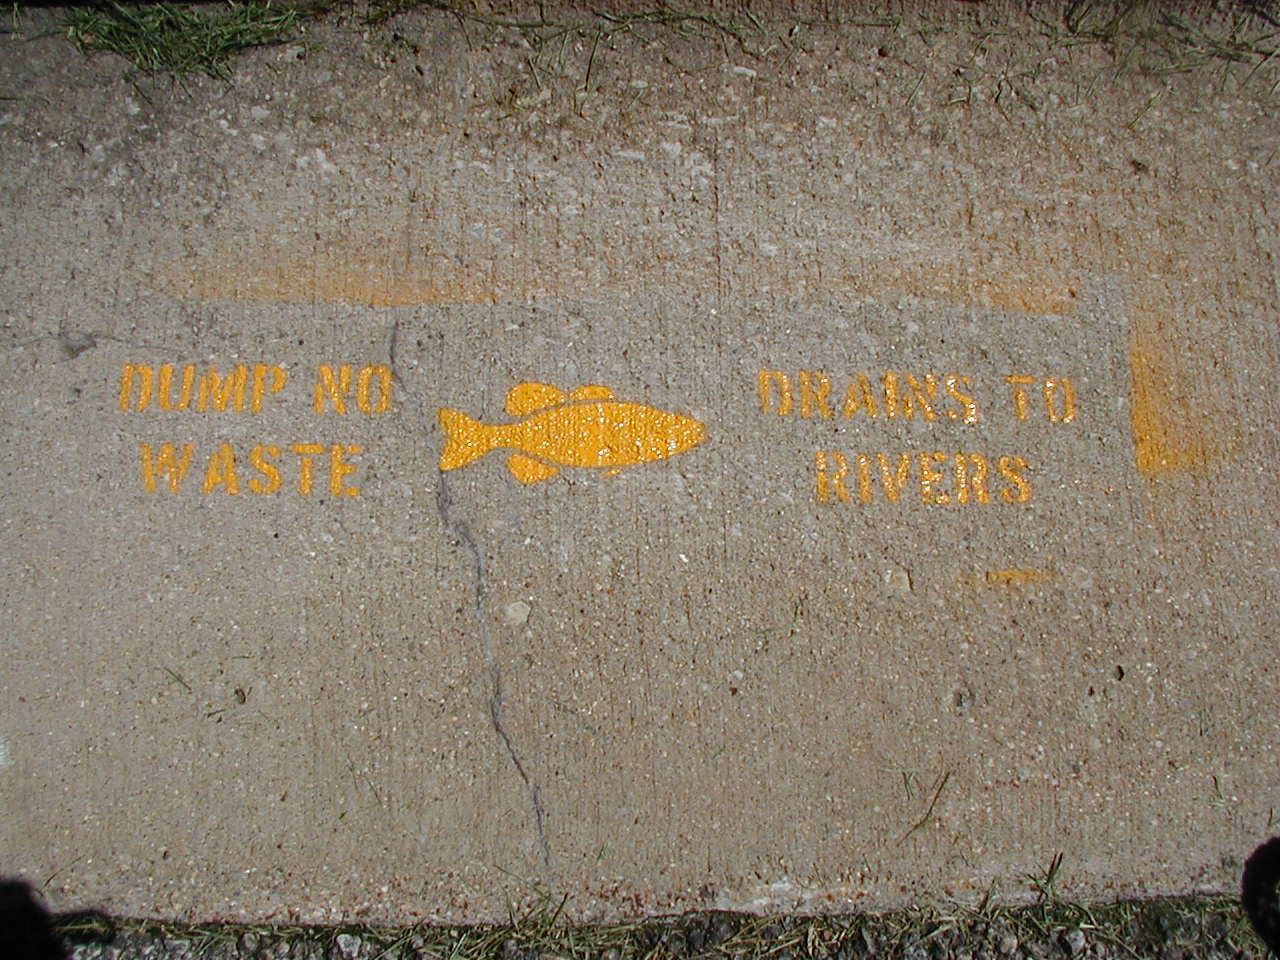 Drains to Rivers" sewer stencil photo that we used when working with the city of Bloomington Public Works Department.